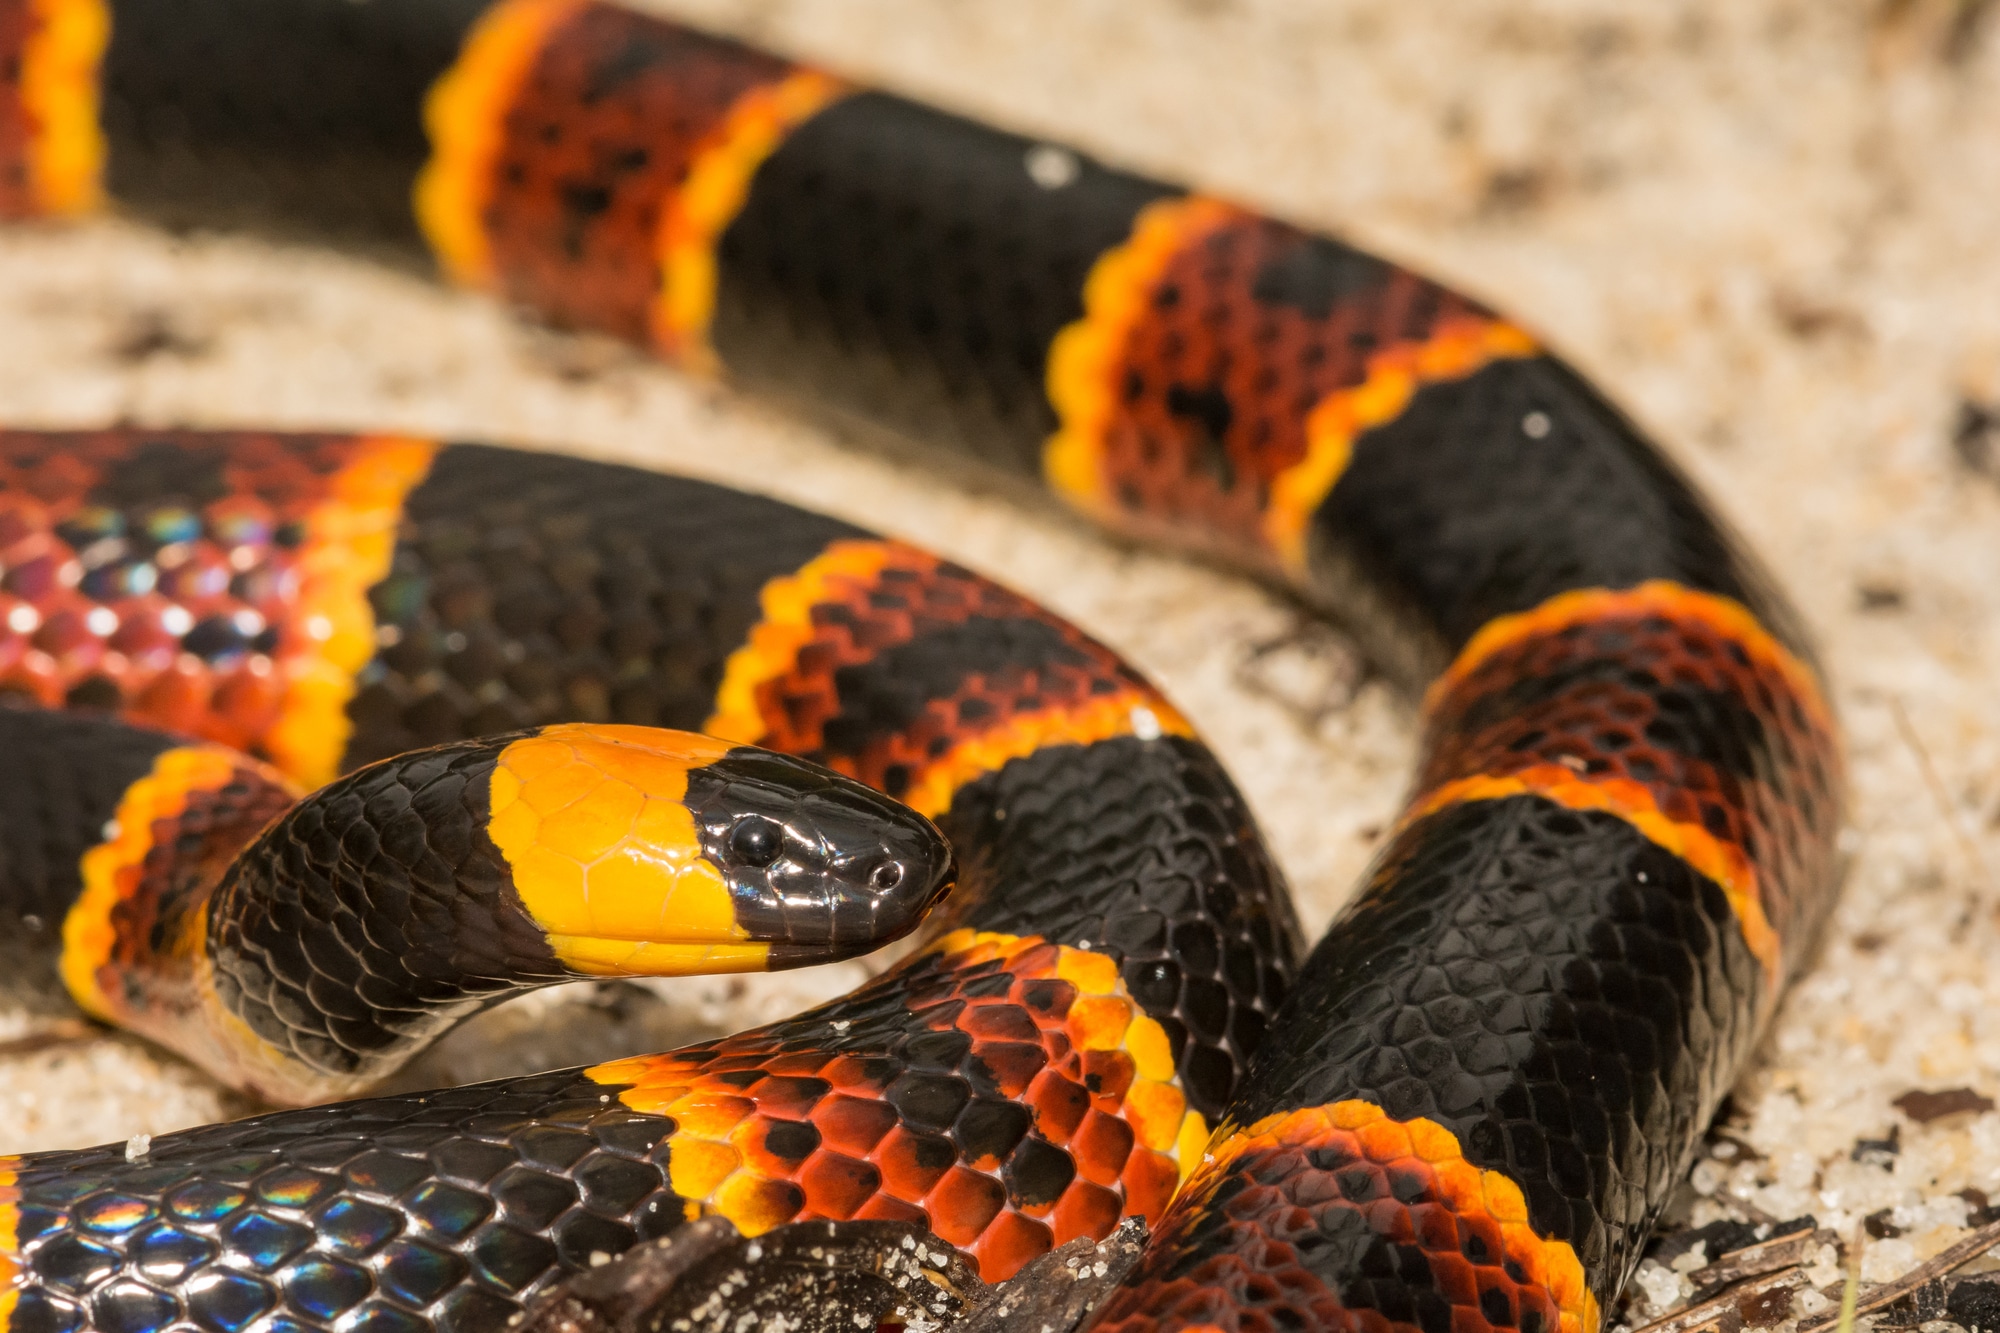 Eastern Coral Snake on the sand